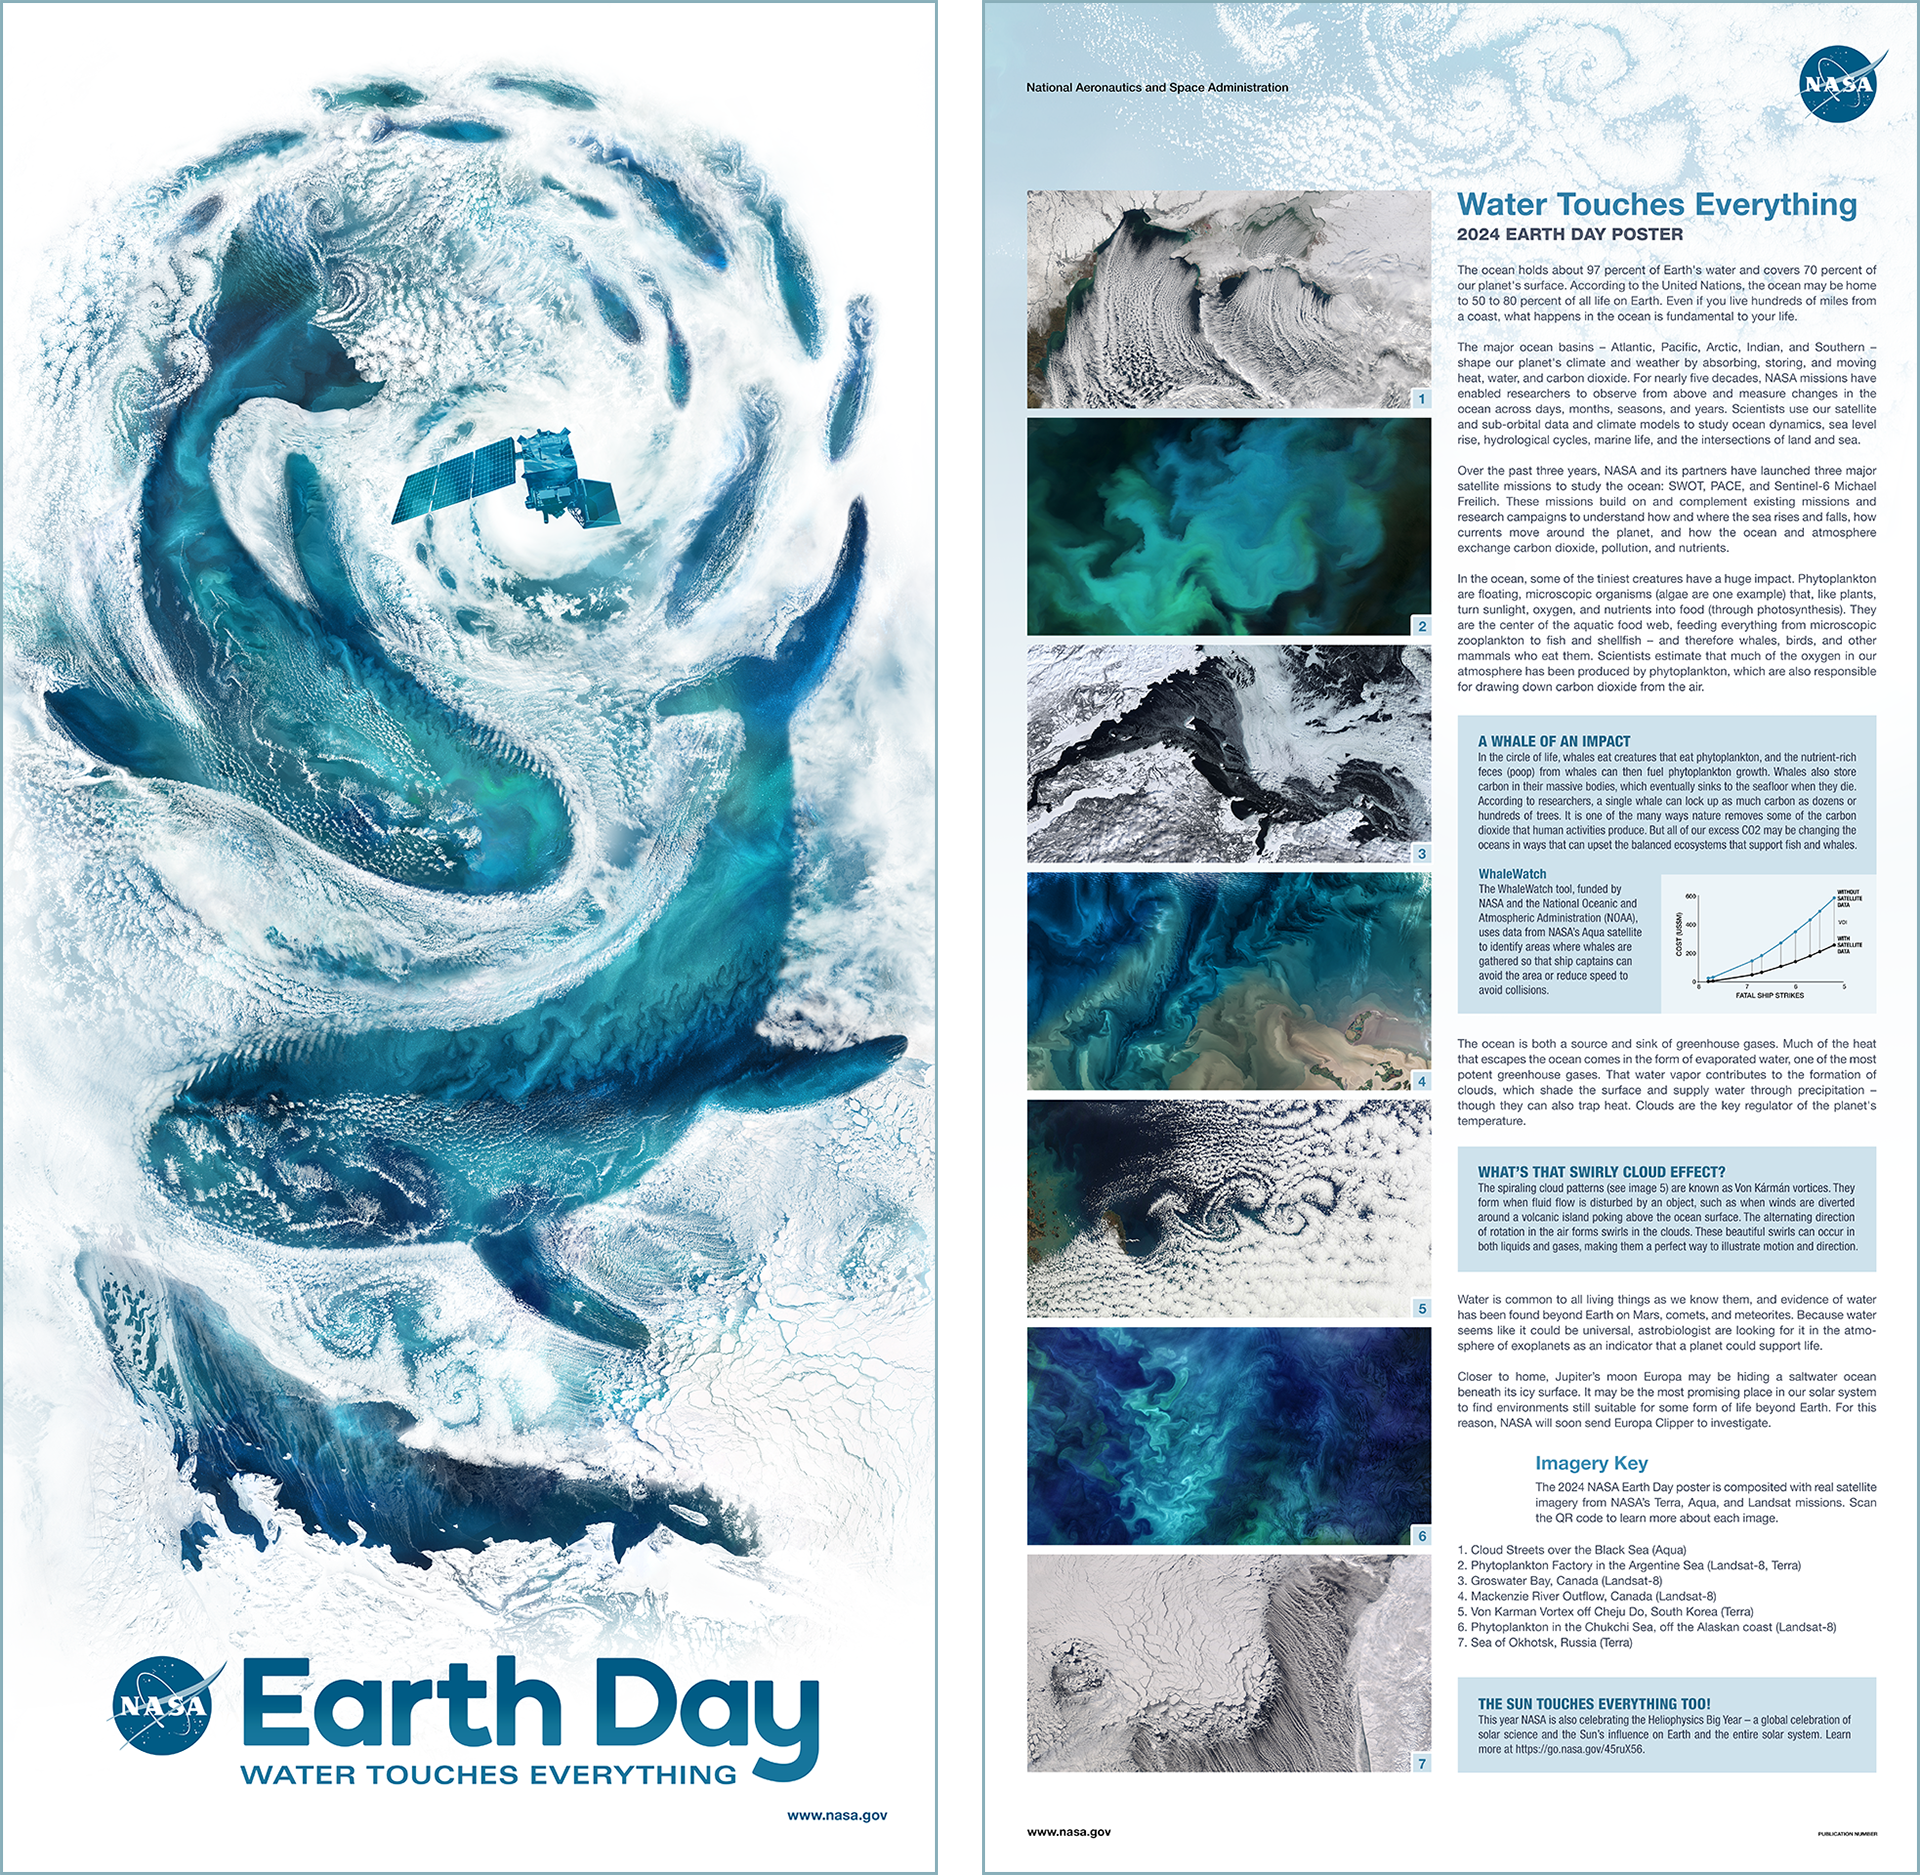 The back and front of the earth day poster. This 2024 Earth Day poster is an ocean themed vertical 15x30 illustration created from NASA satellite cloud imagery overlaid on ocean data. The white cloud imagery wraps around shapes, defining three whales and a school of fish. Swirly cloud patterns, called Von Kármán Vortices, create the feeling of movement in the composition. The focal point is a cyclone in the upper third of the poster. At the center flies the recently launched PACE satellite. The ocean imagery – composed of blues, aquas, and greens – is filled with subtle color changes and undulating patterns created by churning sediment, organic matter and phytoplankton.